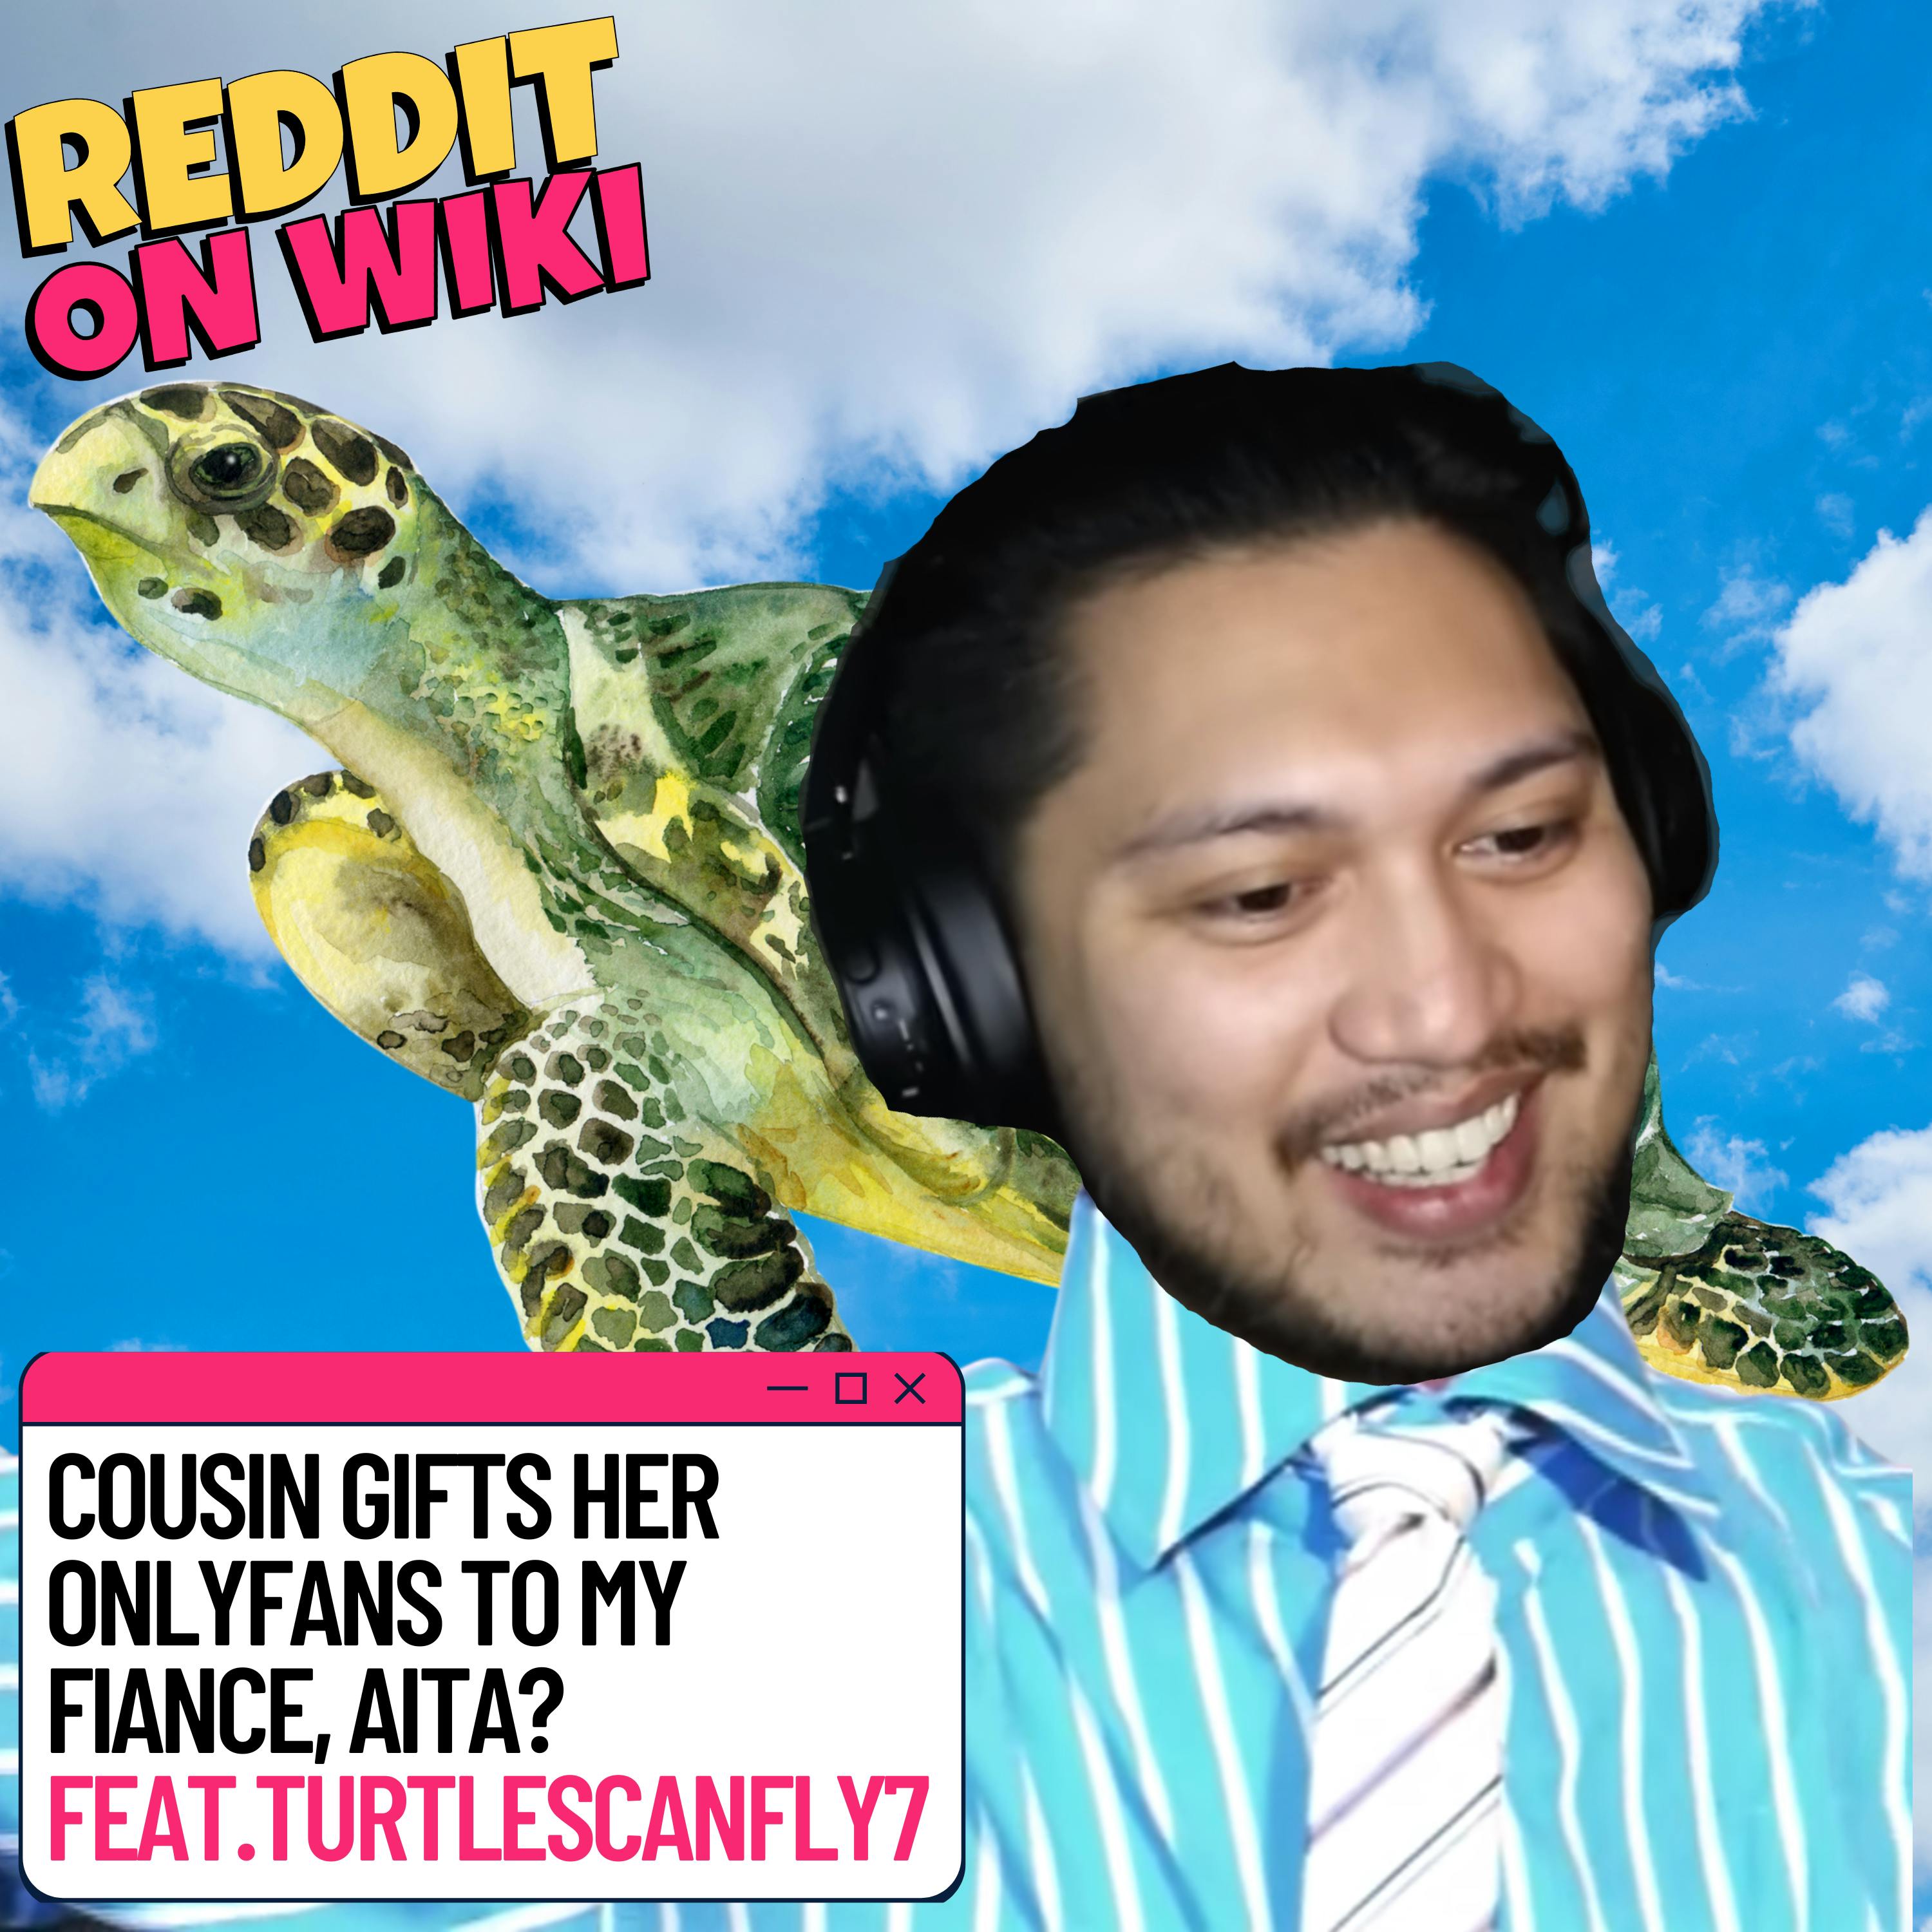 #119: Cousin Gifts Her ONLYFANS To My FIANCÉ!! ft. TurtlesCanFly7 | Am I The Asshole Image